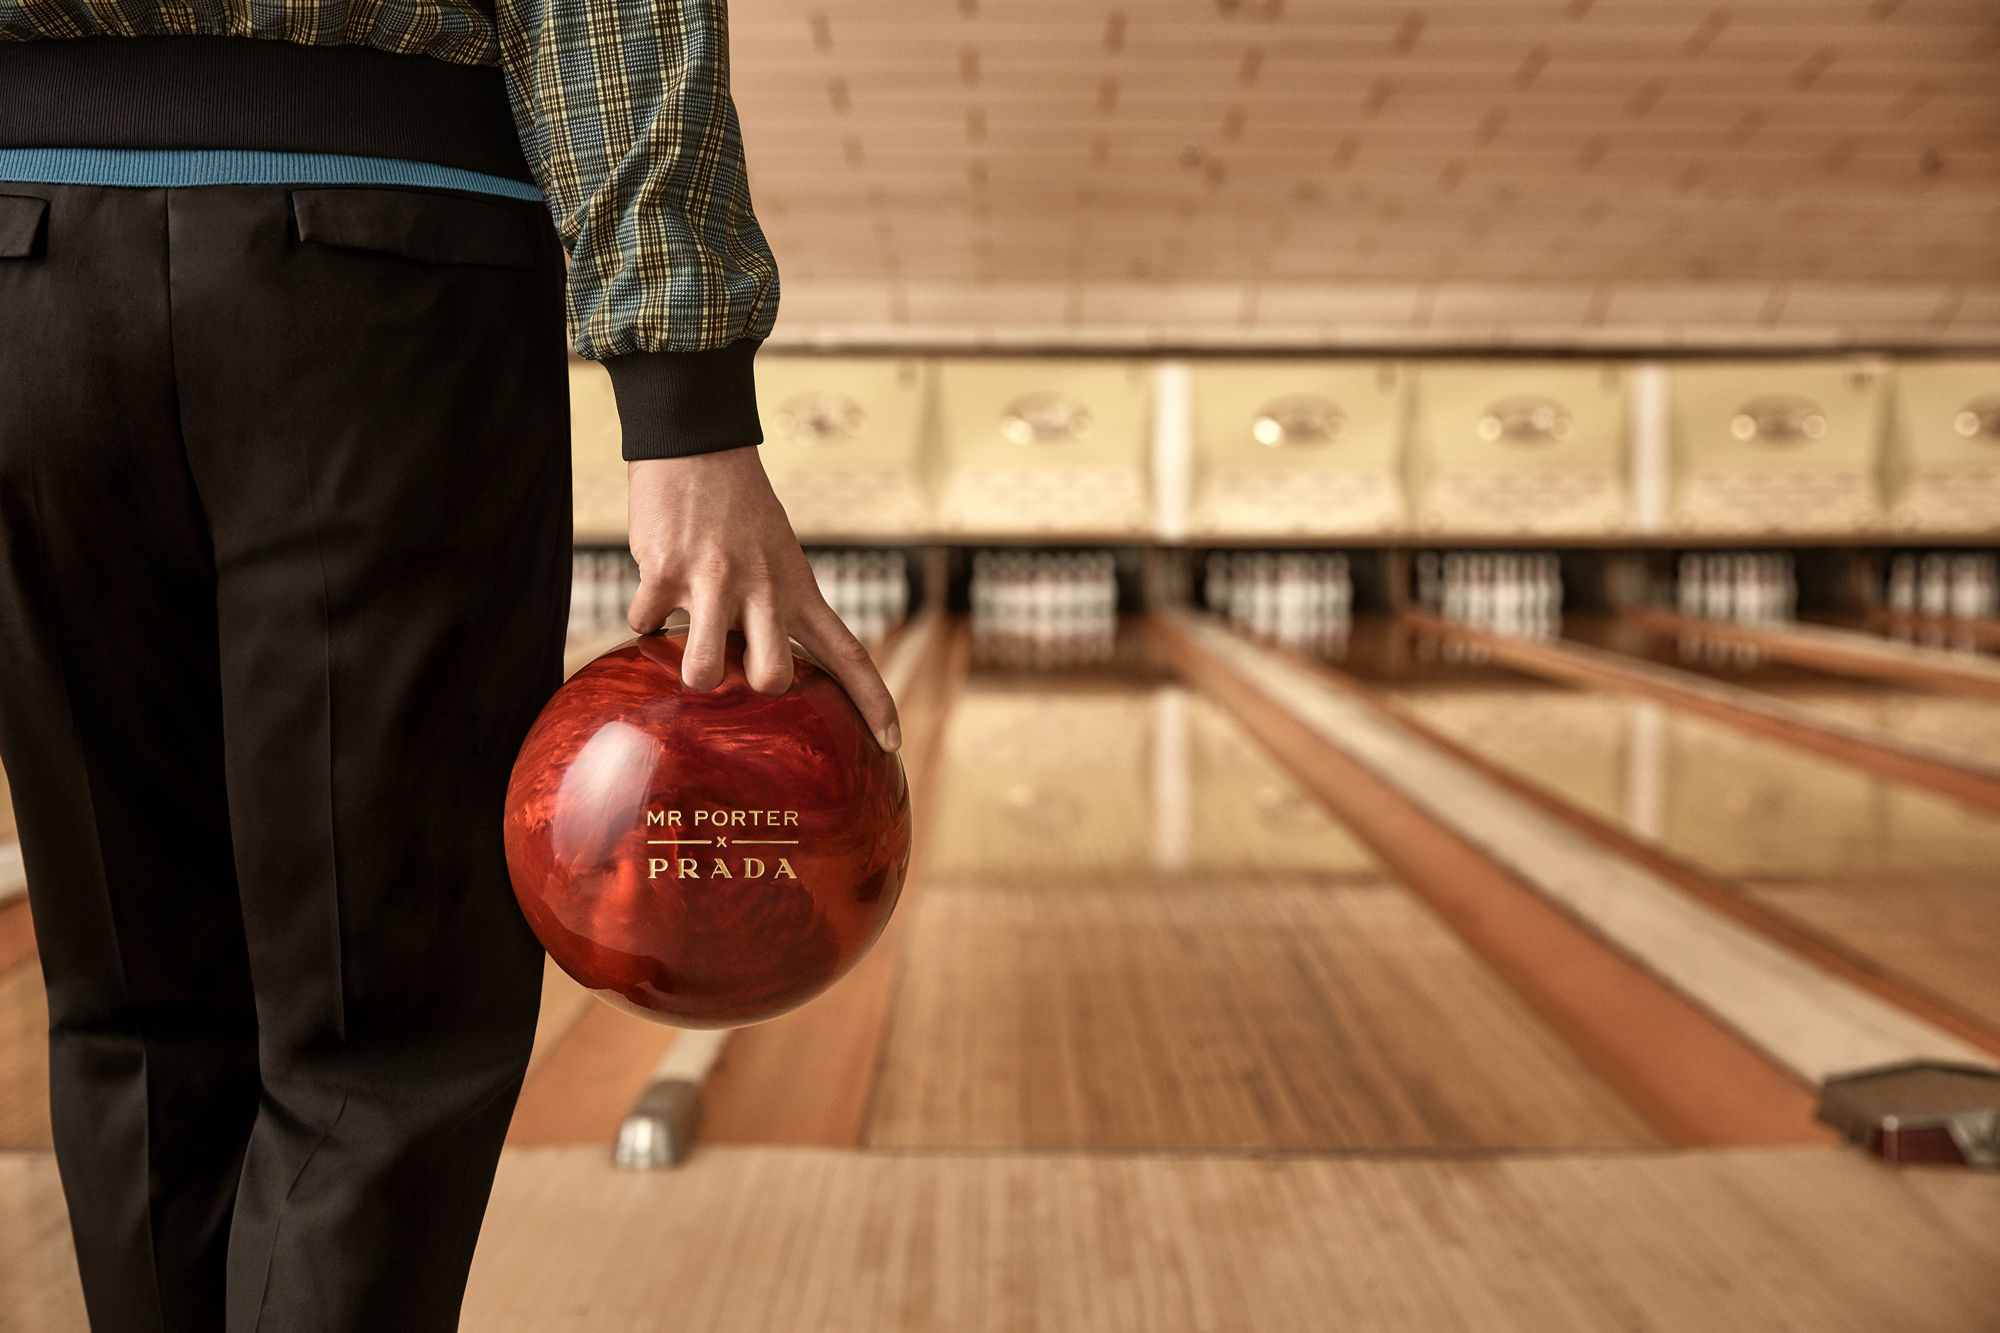 Prada and Mr Porter team up for a kitschy bowling-inspired collection